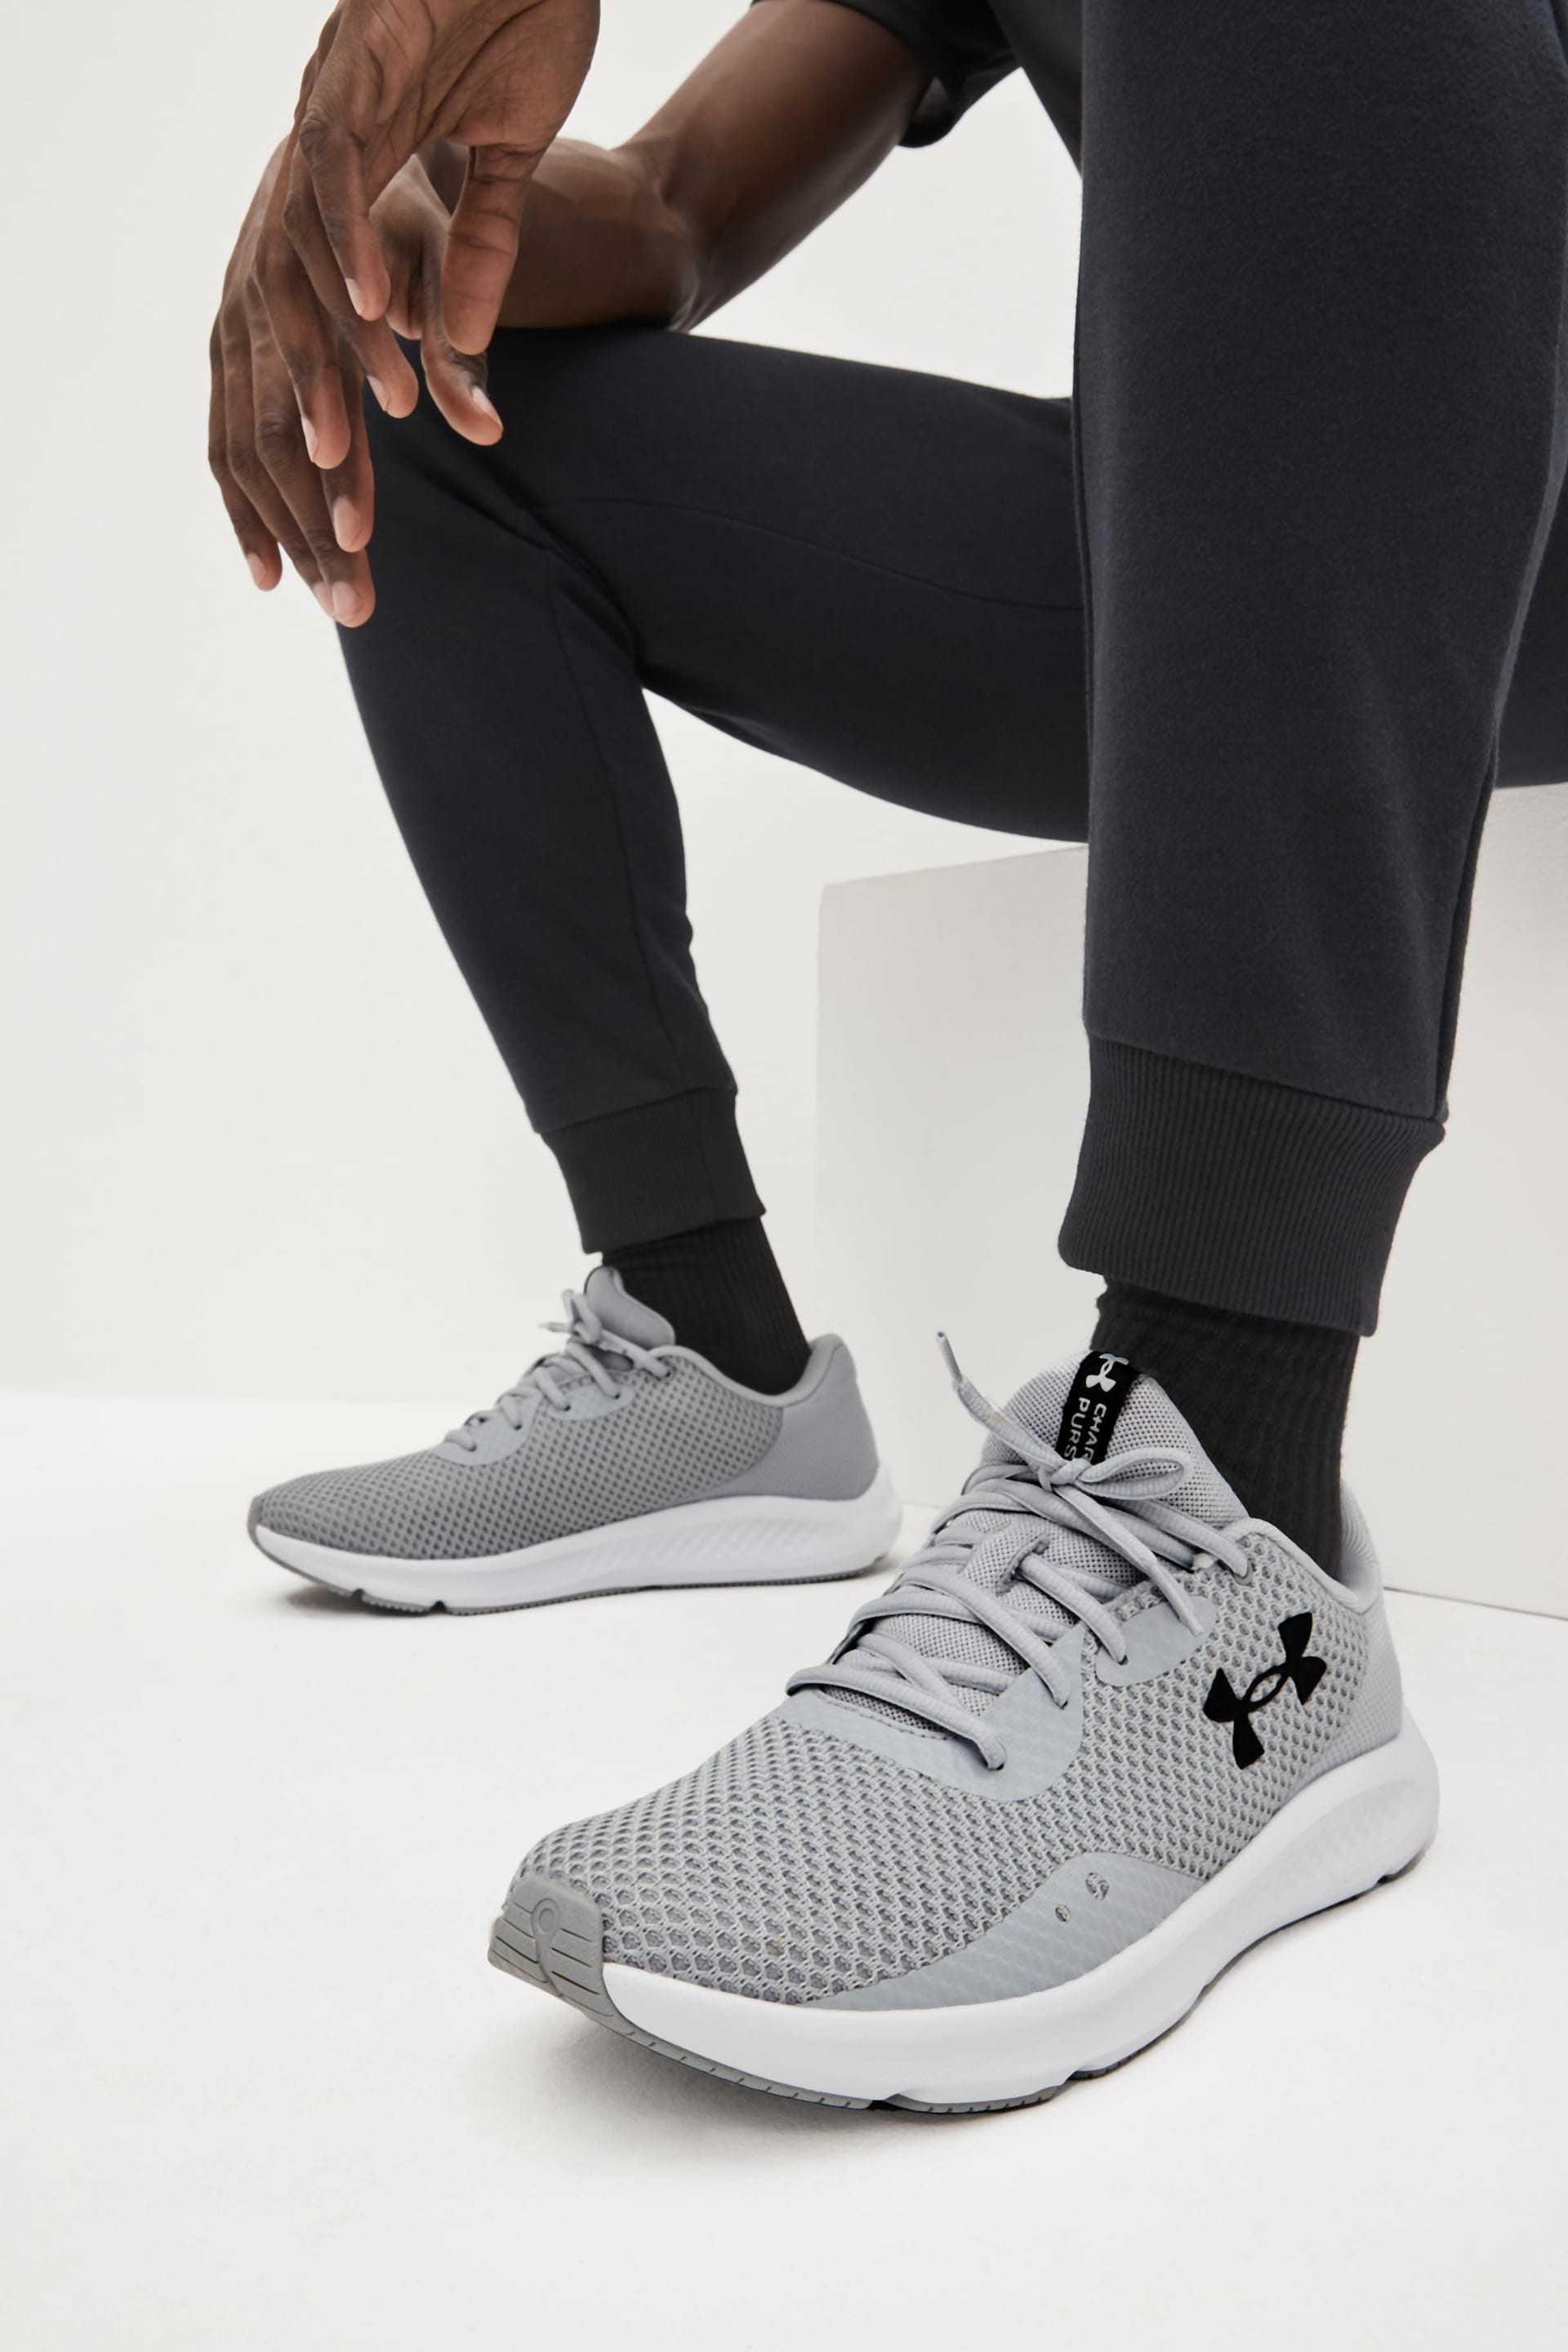 Under Armour Grey Charged Pursuit 3 Trainers - Image 1 of 2